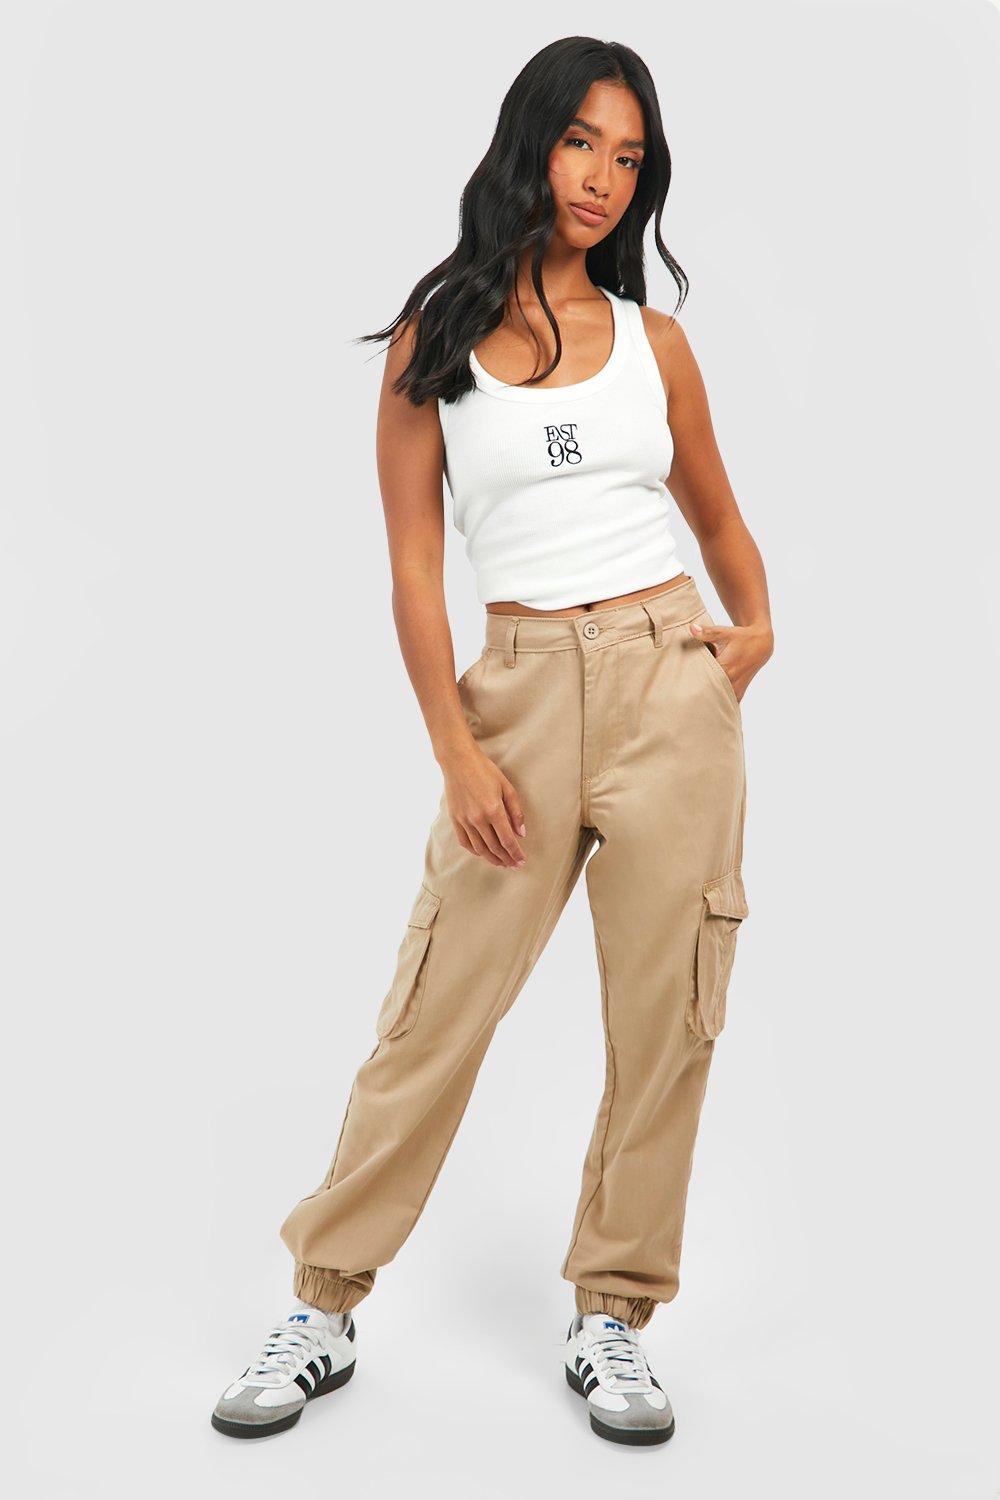 Buy FITHUB Women's Cargo Bell Bottom - Flared Fit, High Rise, Polycotton  Stretch, 4 Pockets, Brand (30, Beige) at Amazon.in